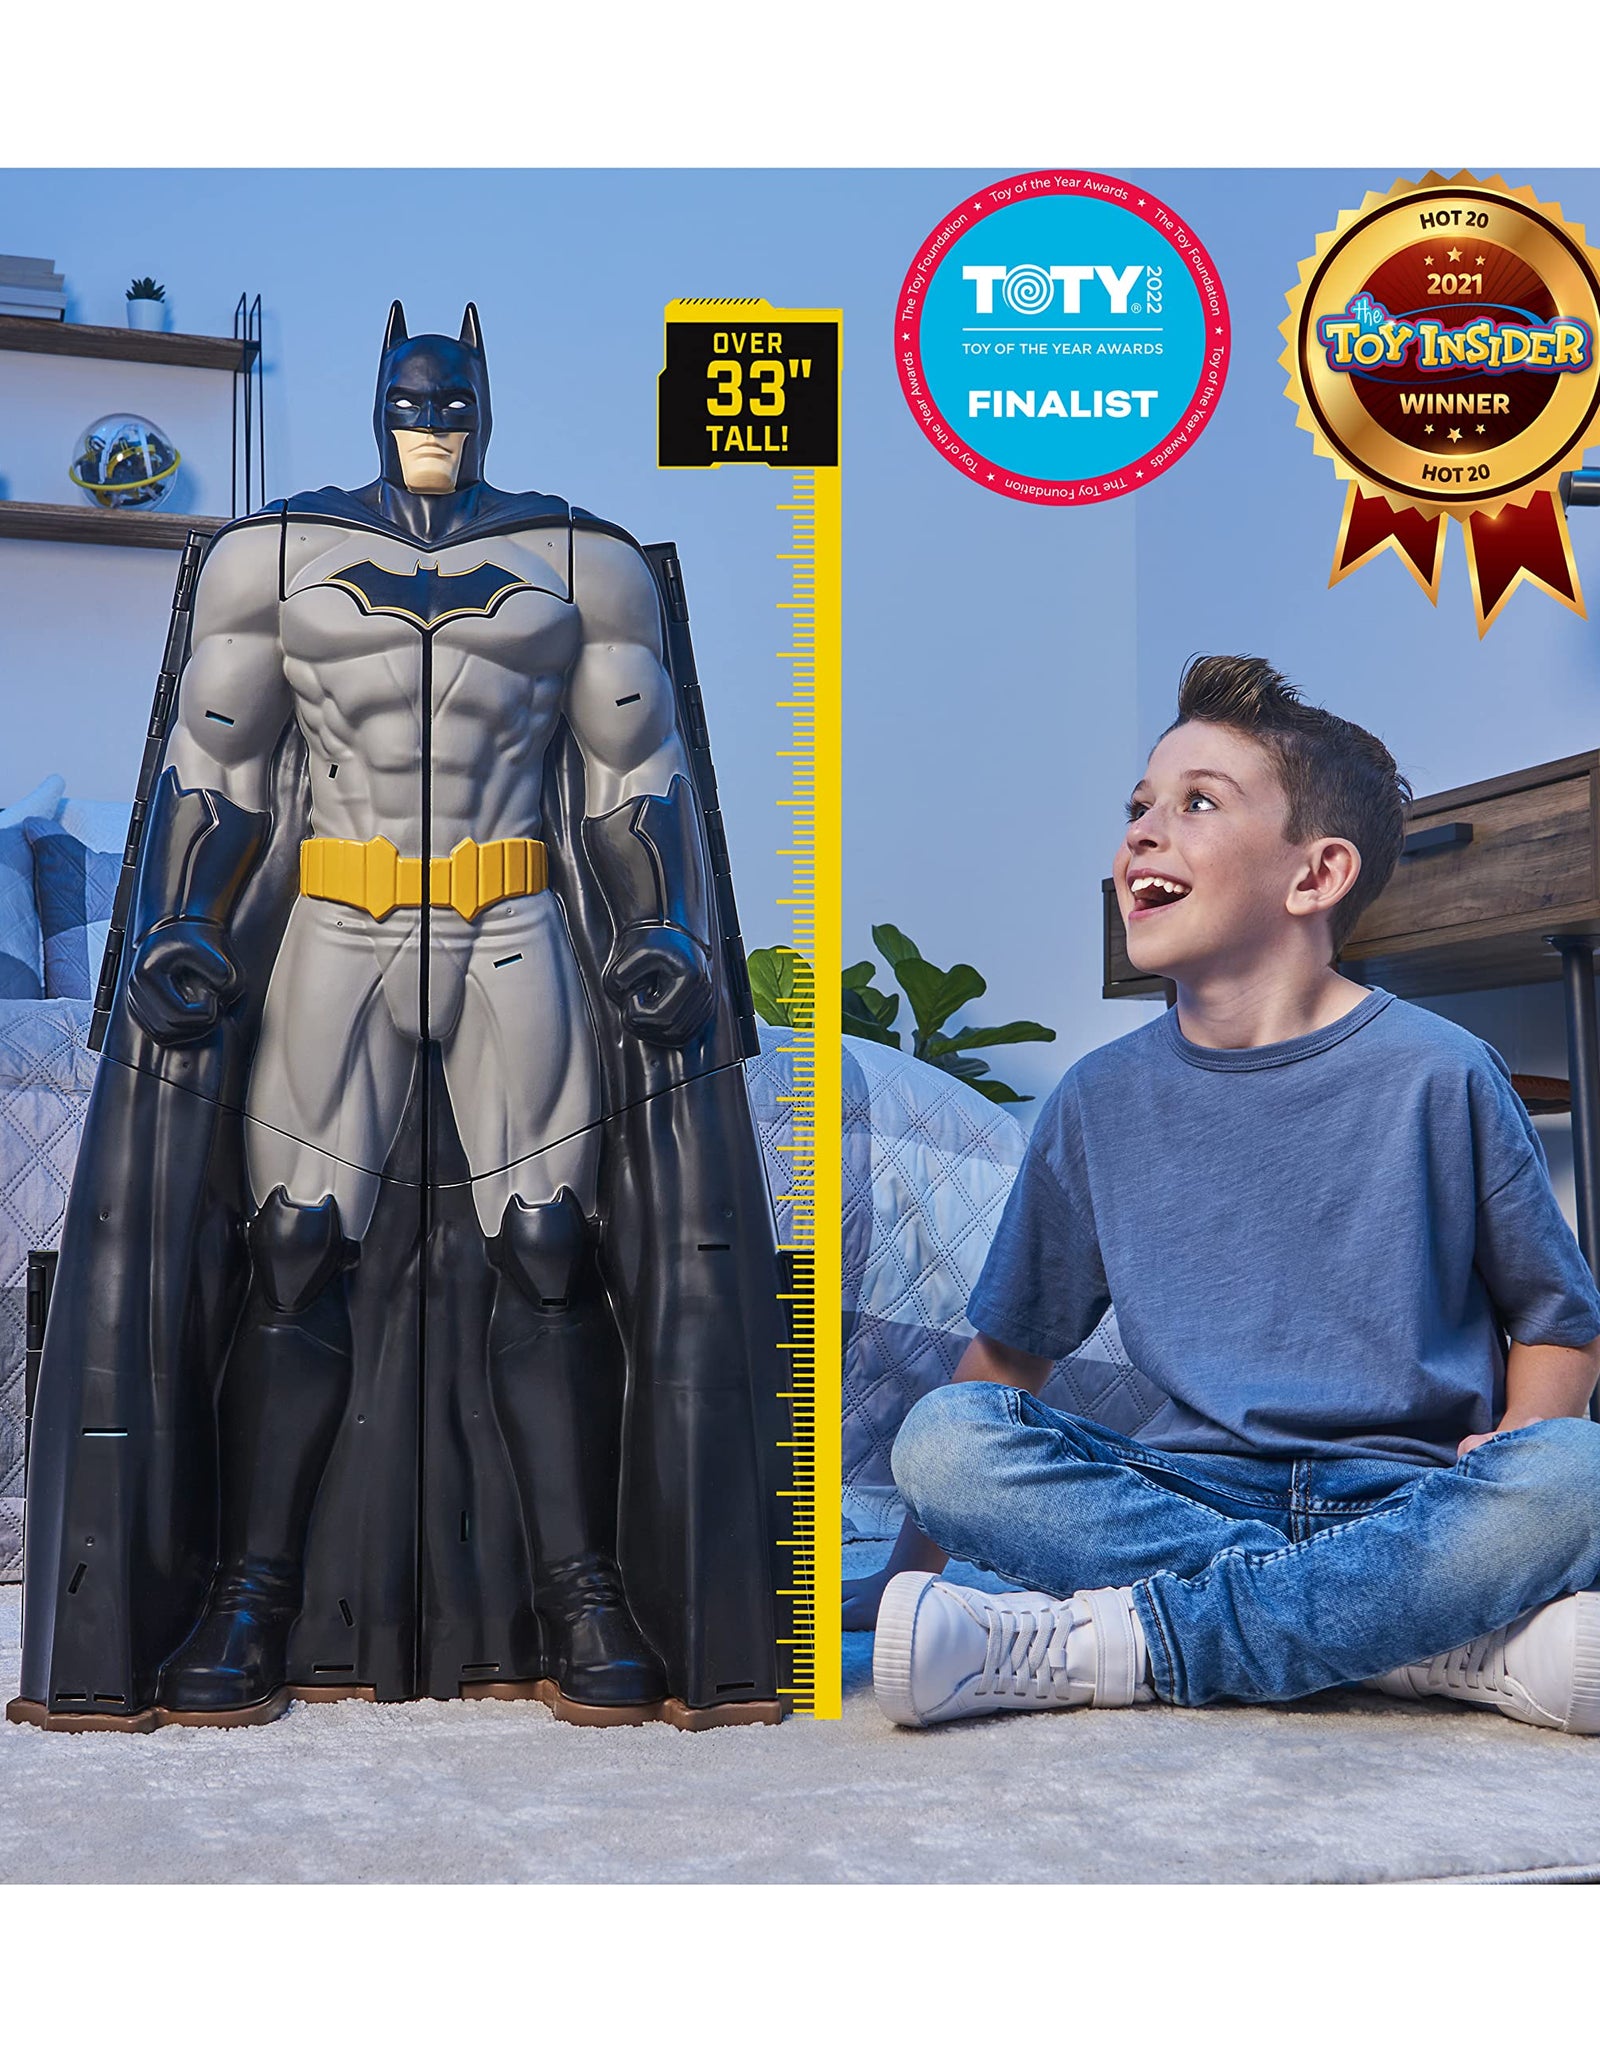 DC Comics Batman, Bat-Tech Batcave, Giant Transforming Playset with Exclusive 4” Batman Figure and Accessories, Kids Toys for Boys Aged 4 and Up